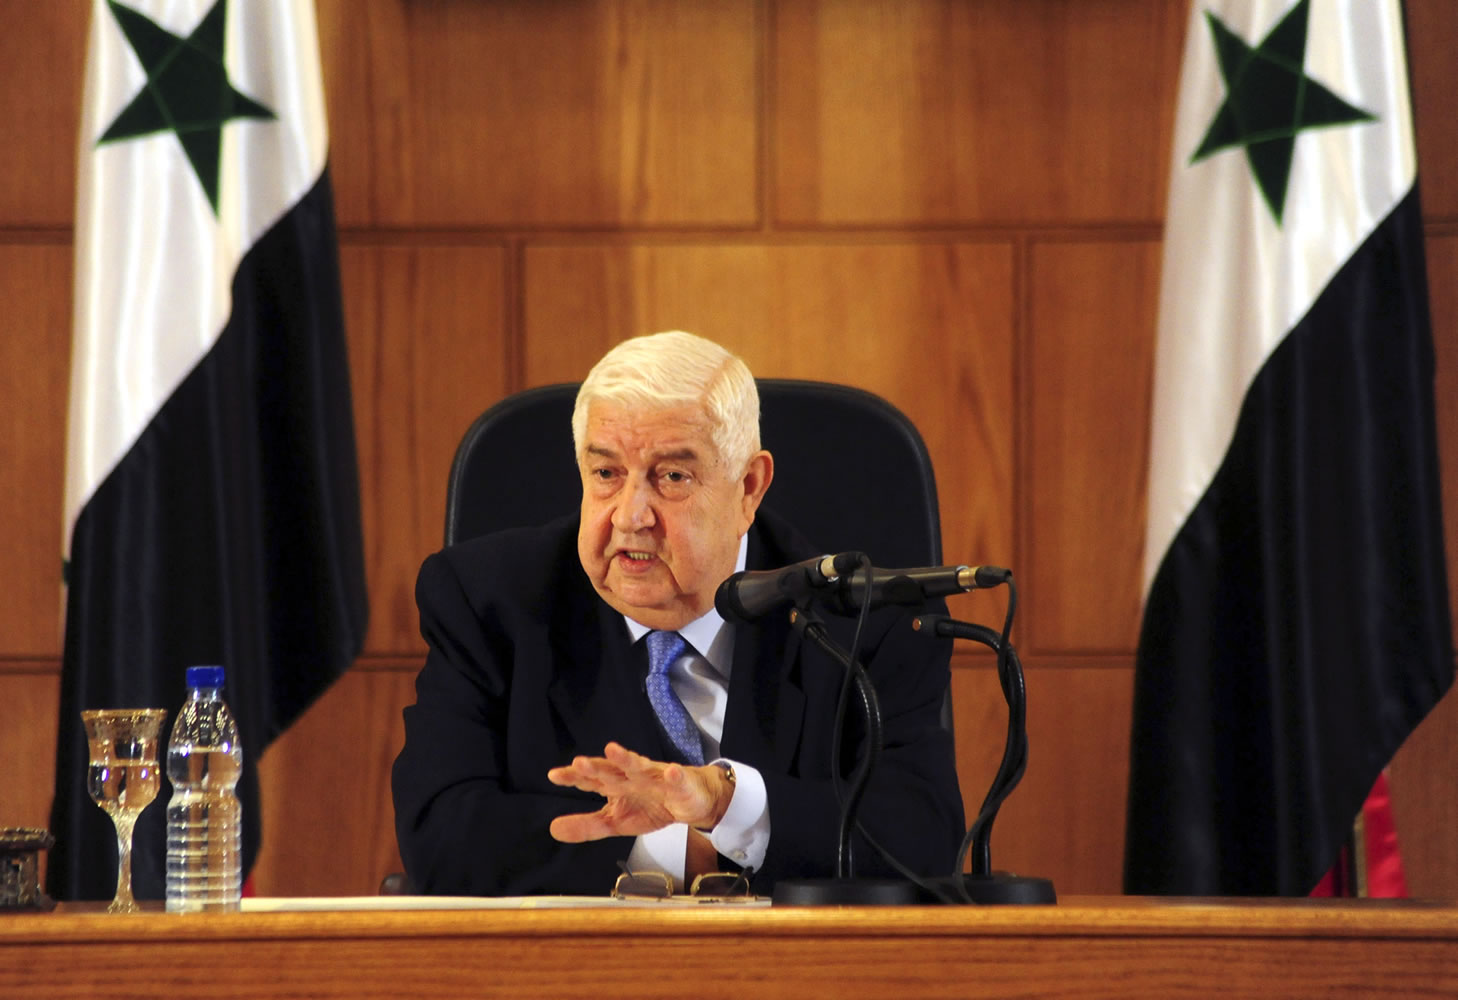 SANA
Syrian Foreign Minister Walid al-Moallem on Monday warned the U.S. not to conduct airstrikes inside Syria against the Islamic State group without Damascus' consent.